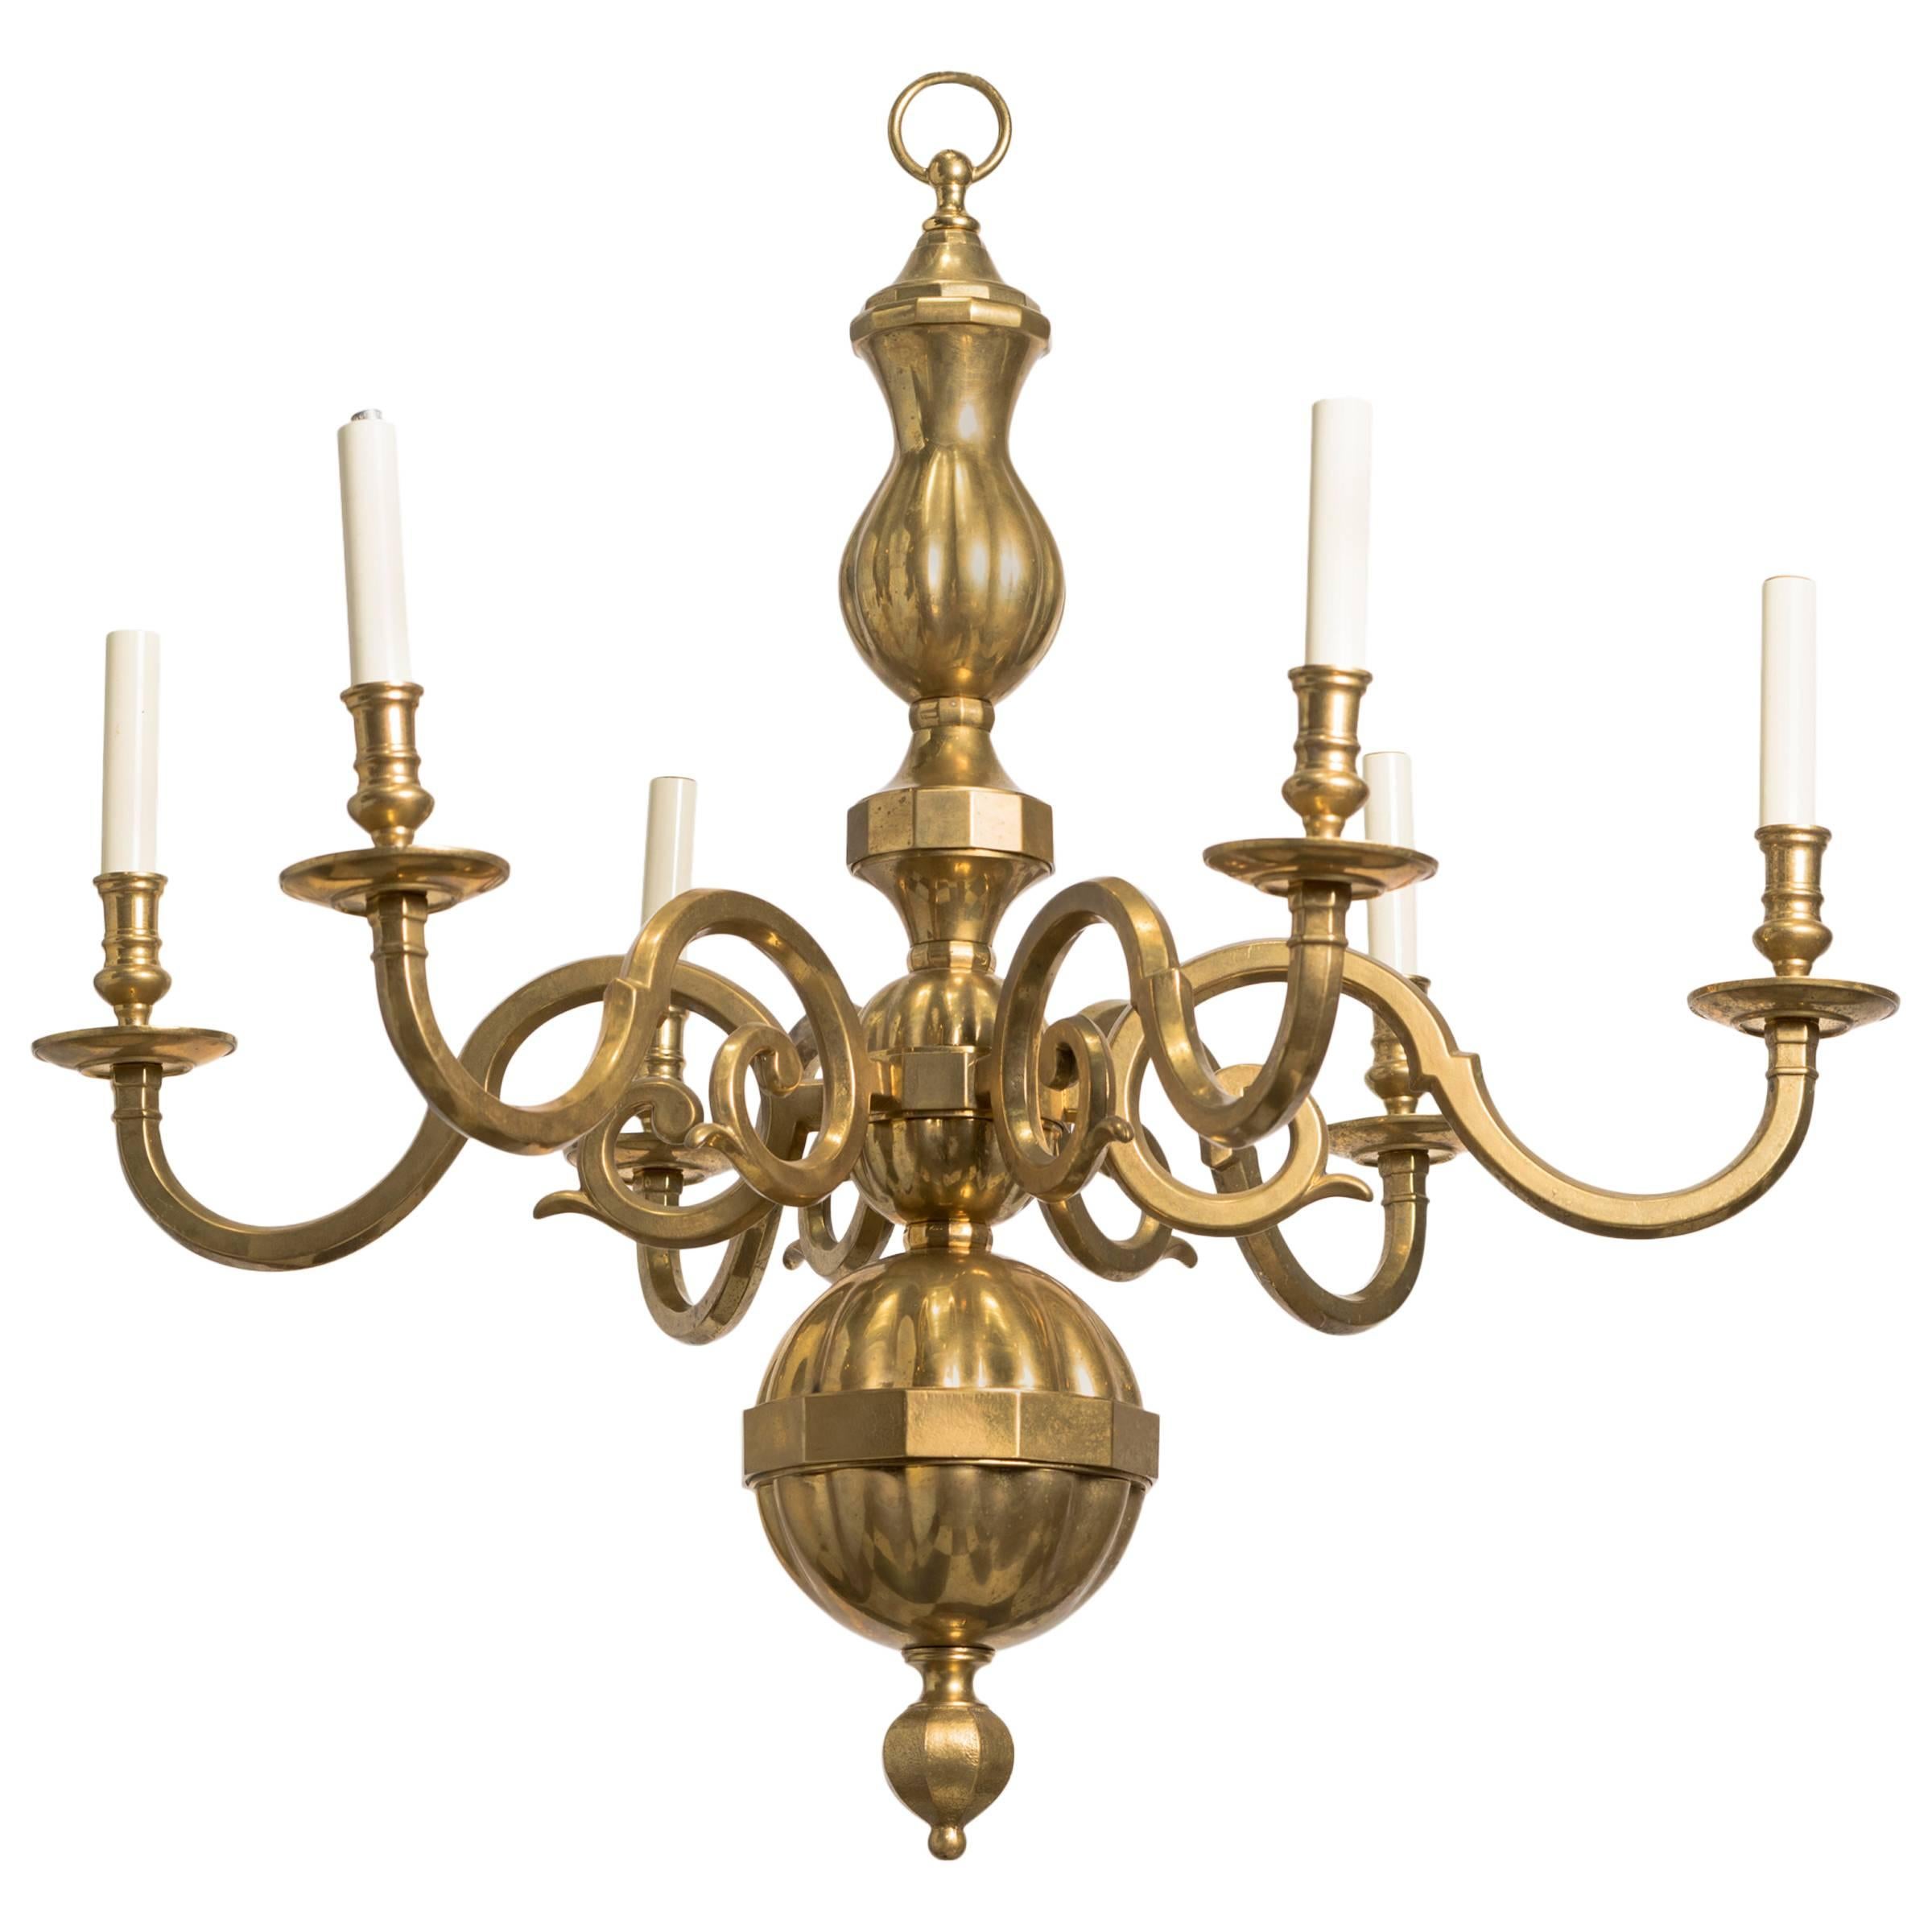 Traditional Solid Brass Six-Arm Chandelier